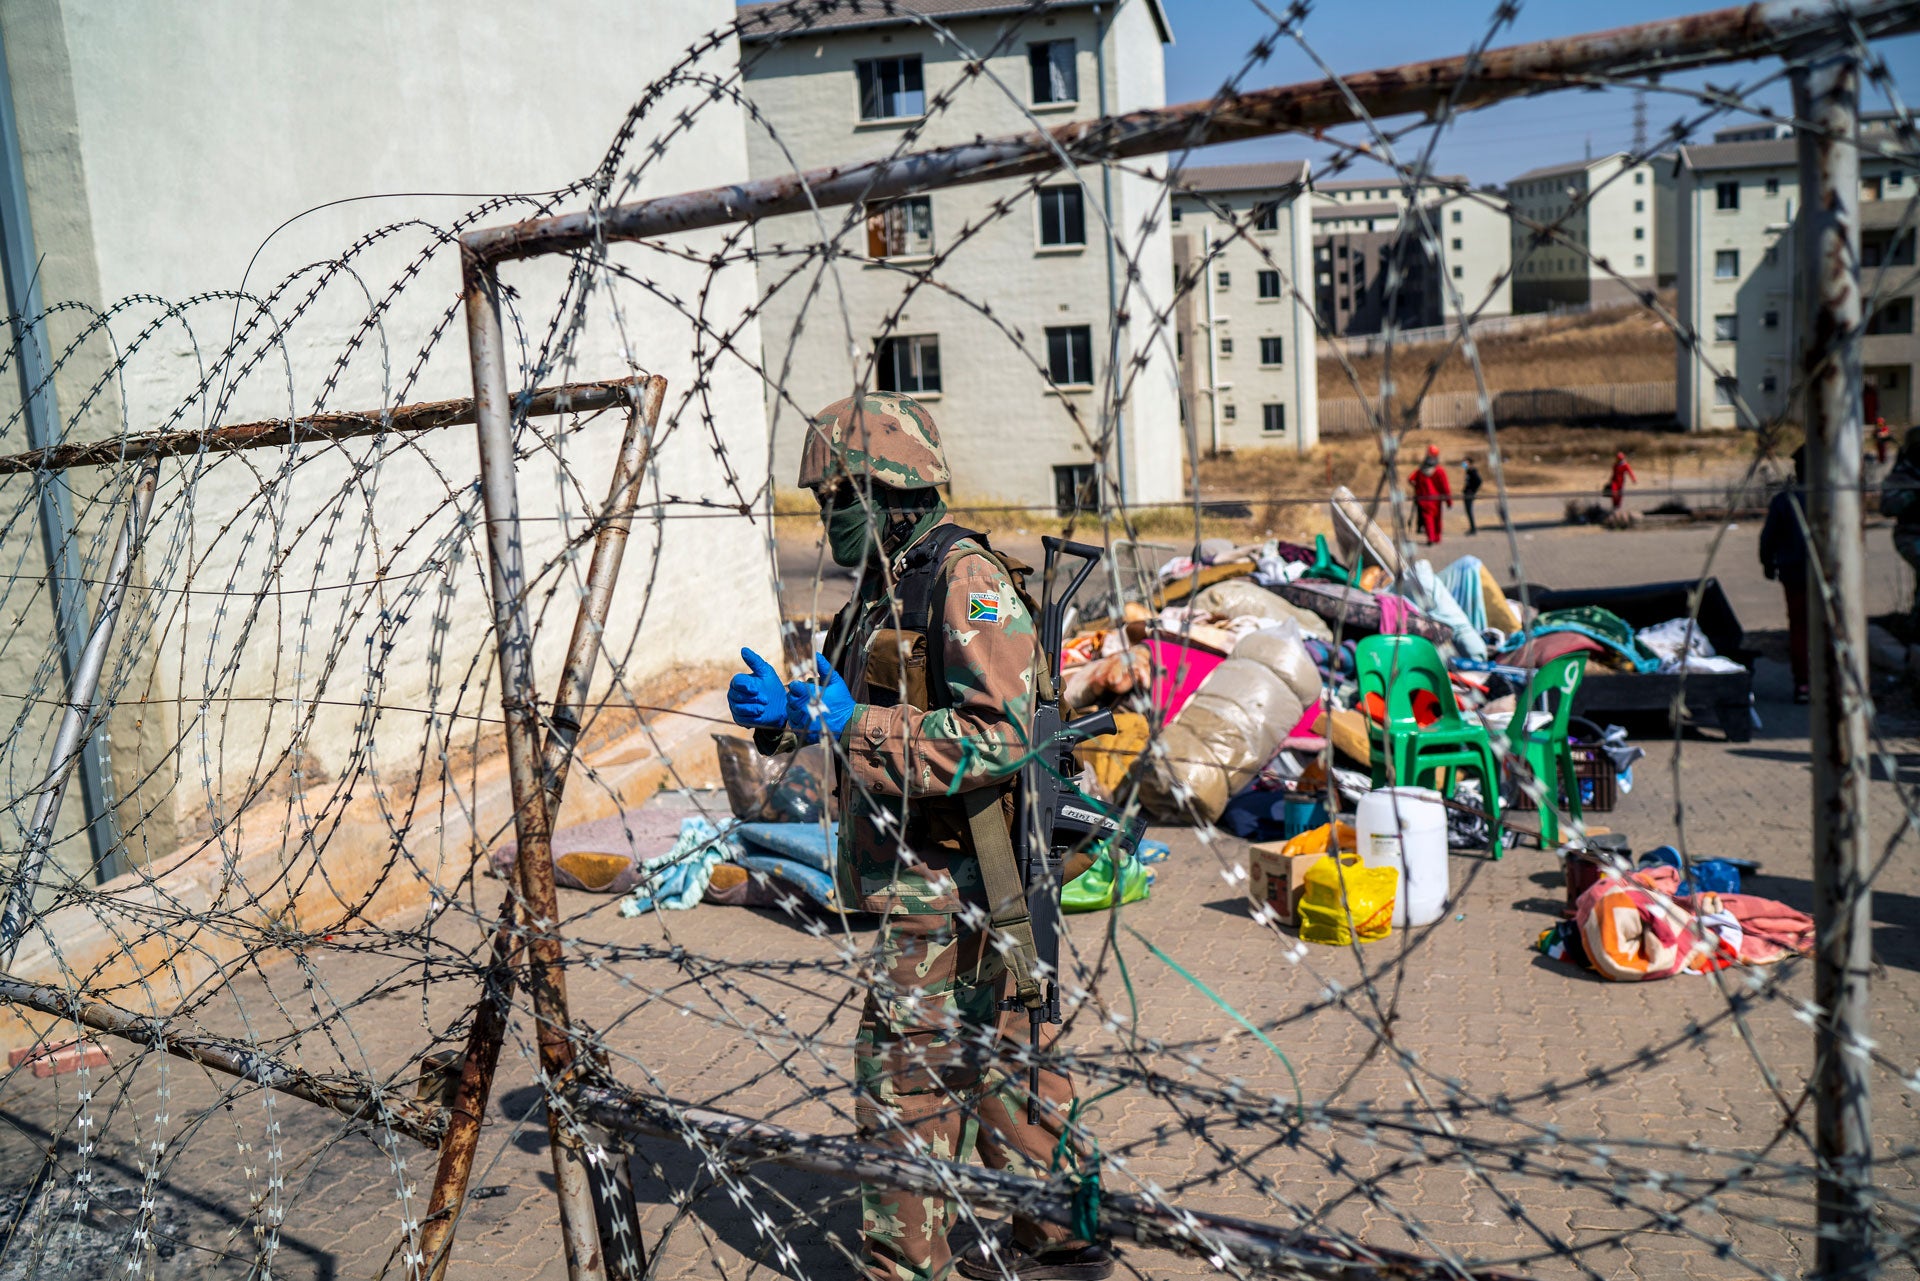 A South Africa soldier guards the entrance of a housing development while flats are being emptied in Johannesburg, South Africa, Wednesday Aug. 12, 2020.